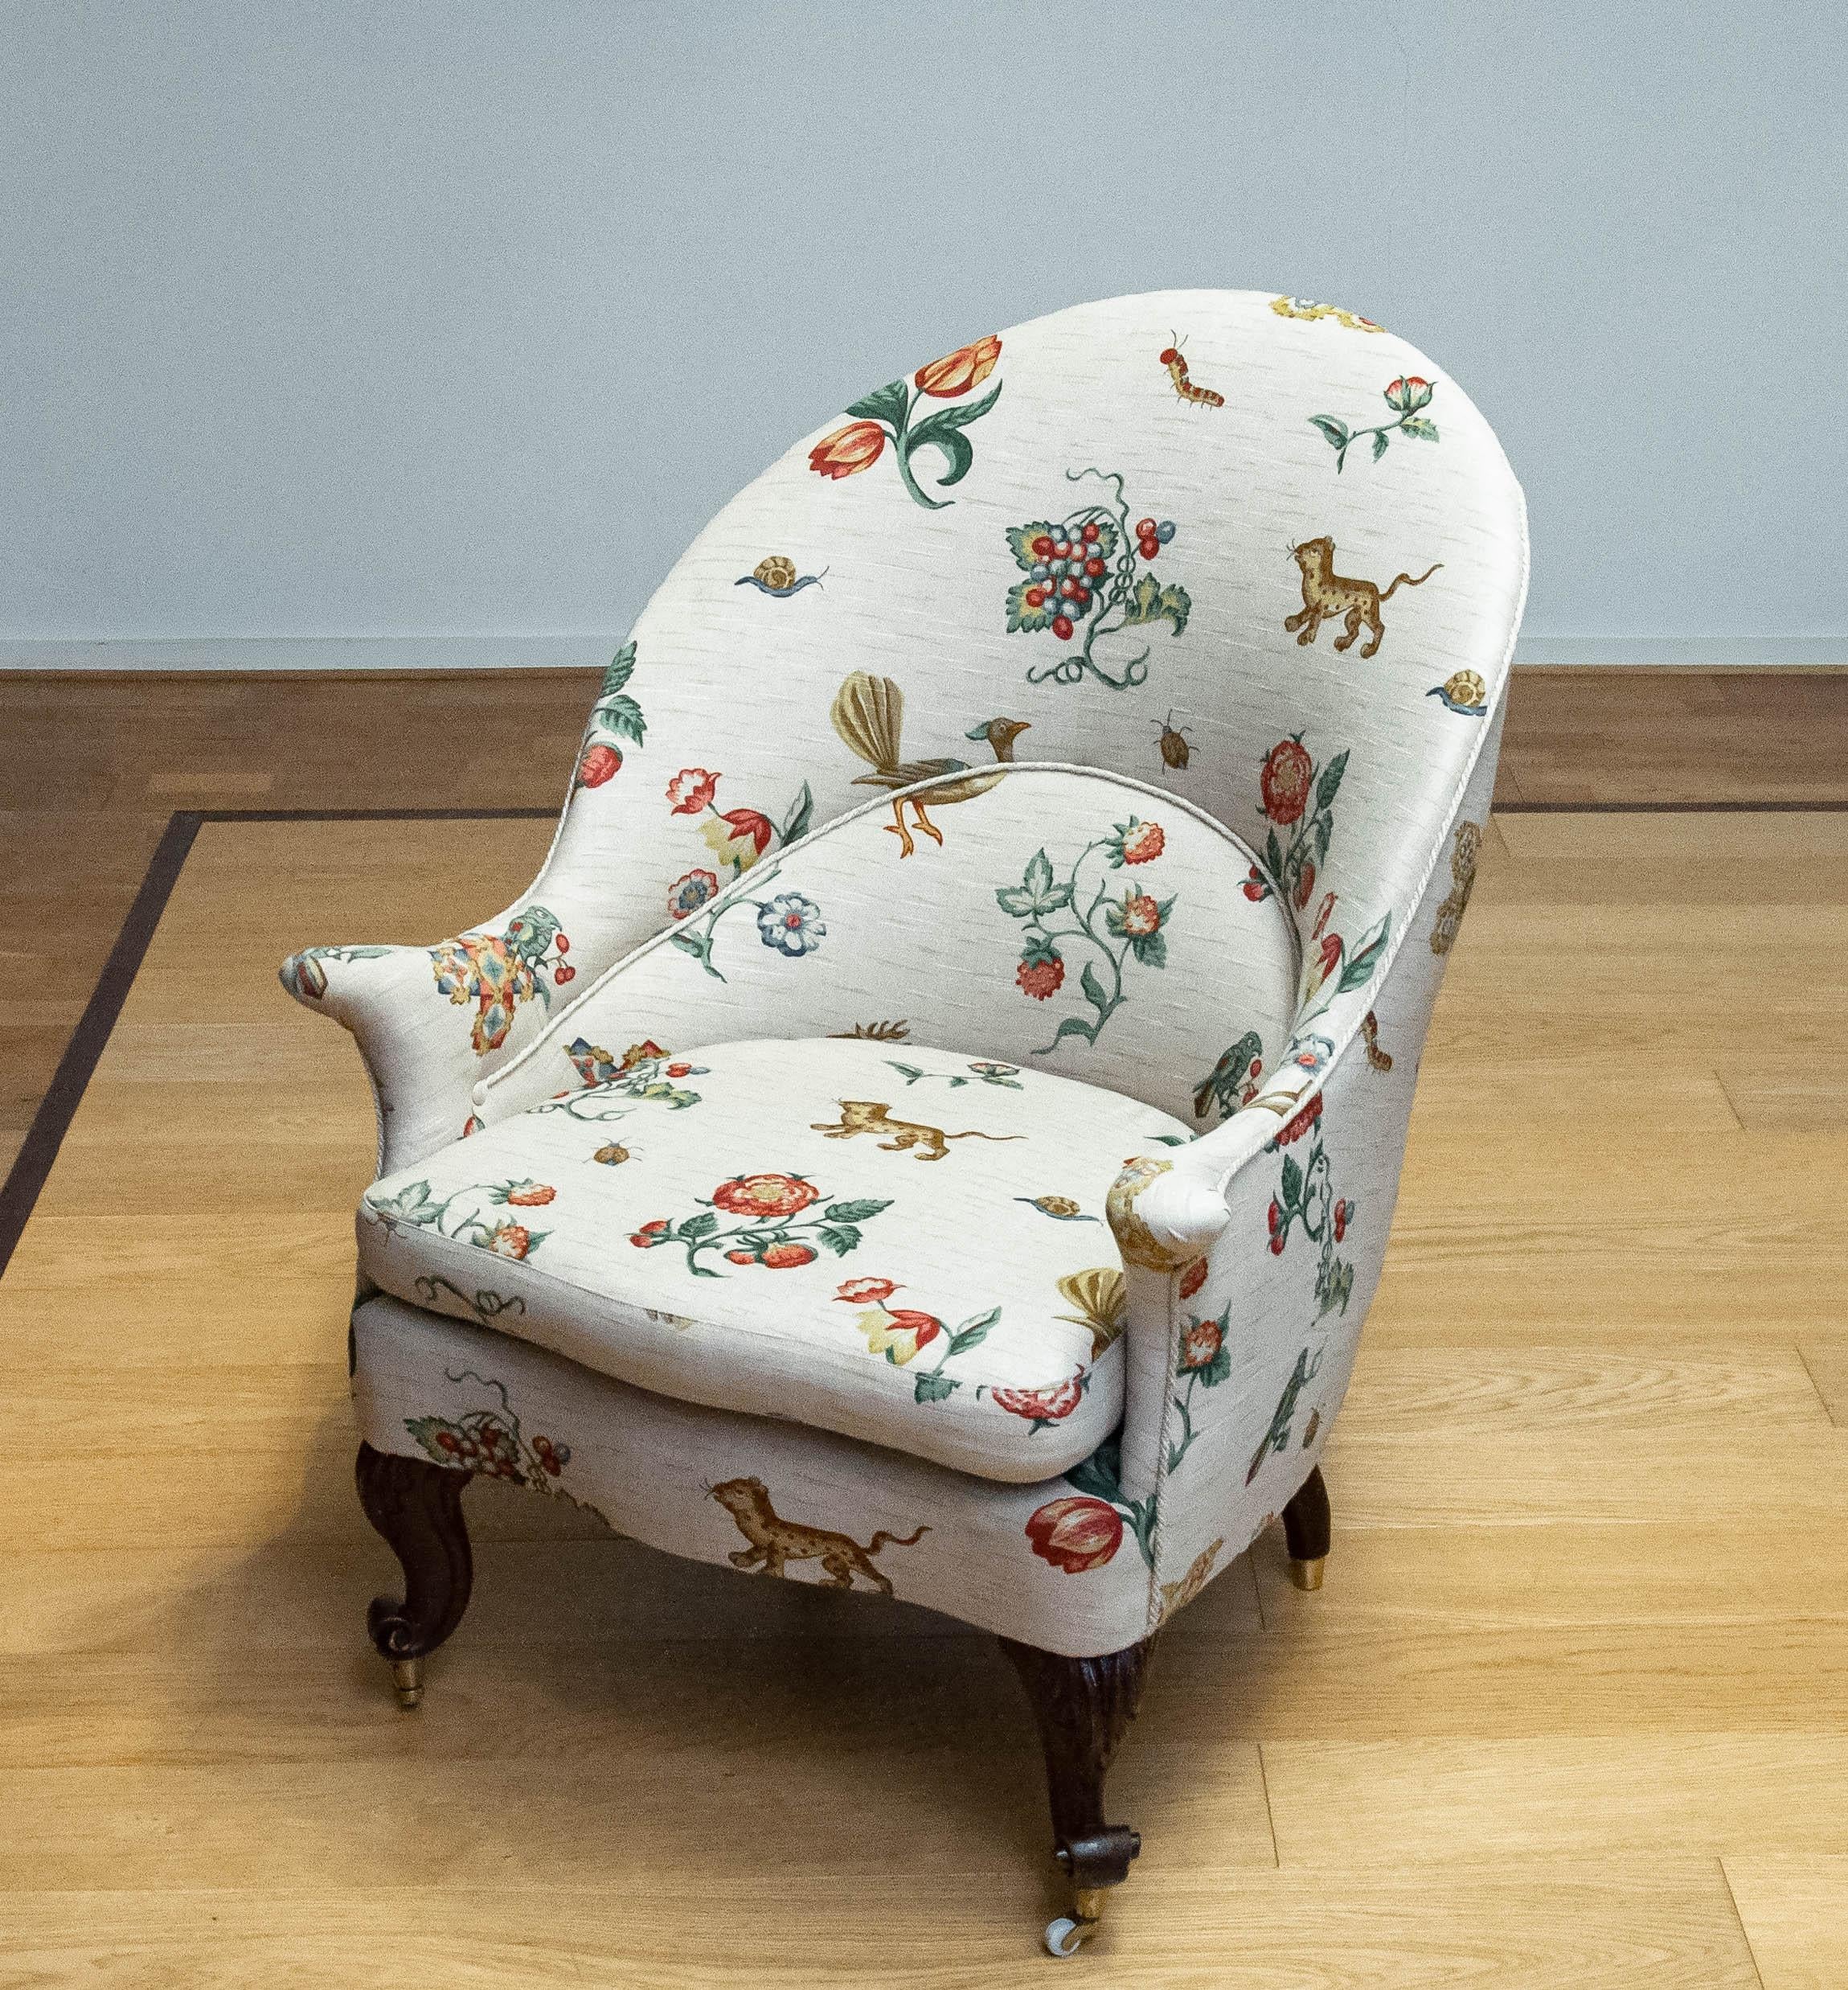 19th Century Swedish Armchair With Linen Flora And Fauna Fantasy Print Fabric For Sale 7